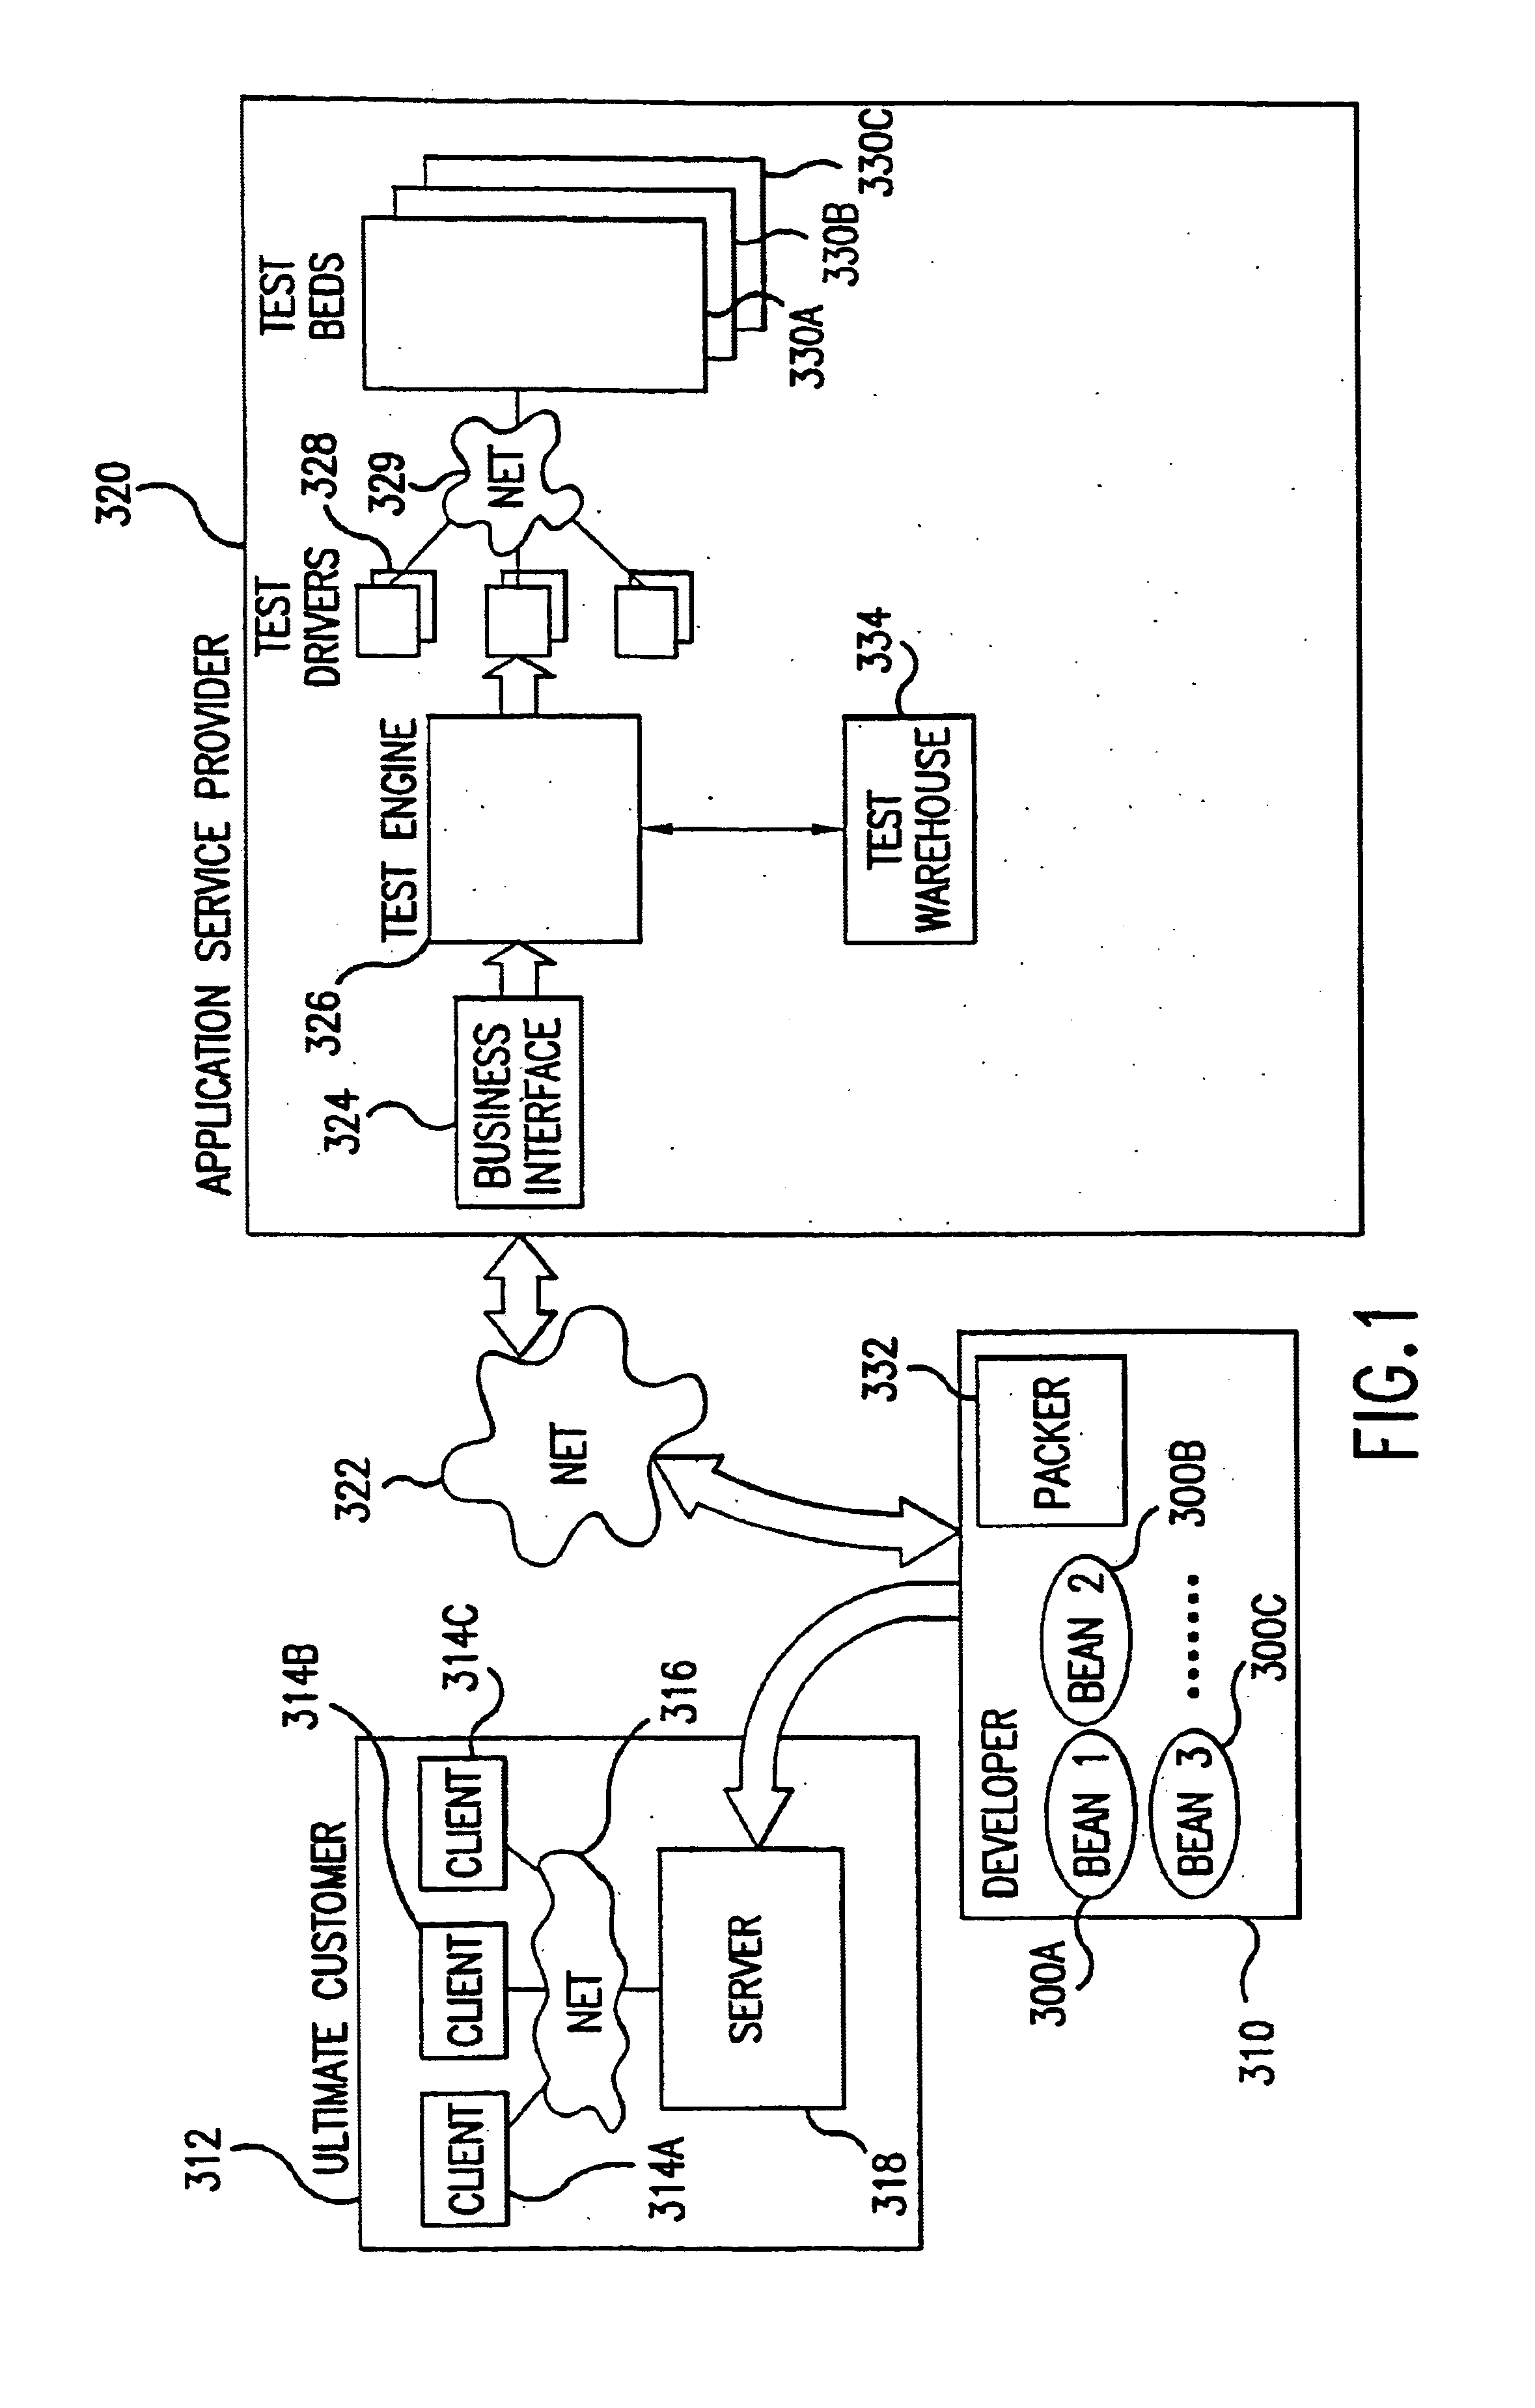 Method of providing software testing services